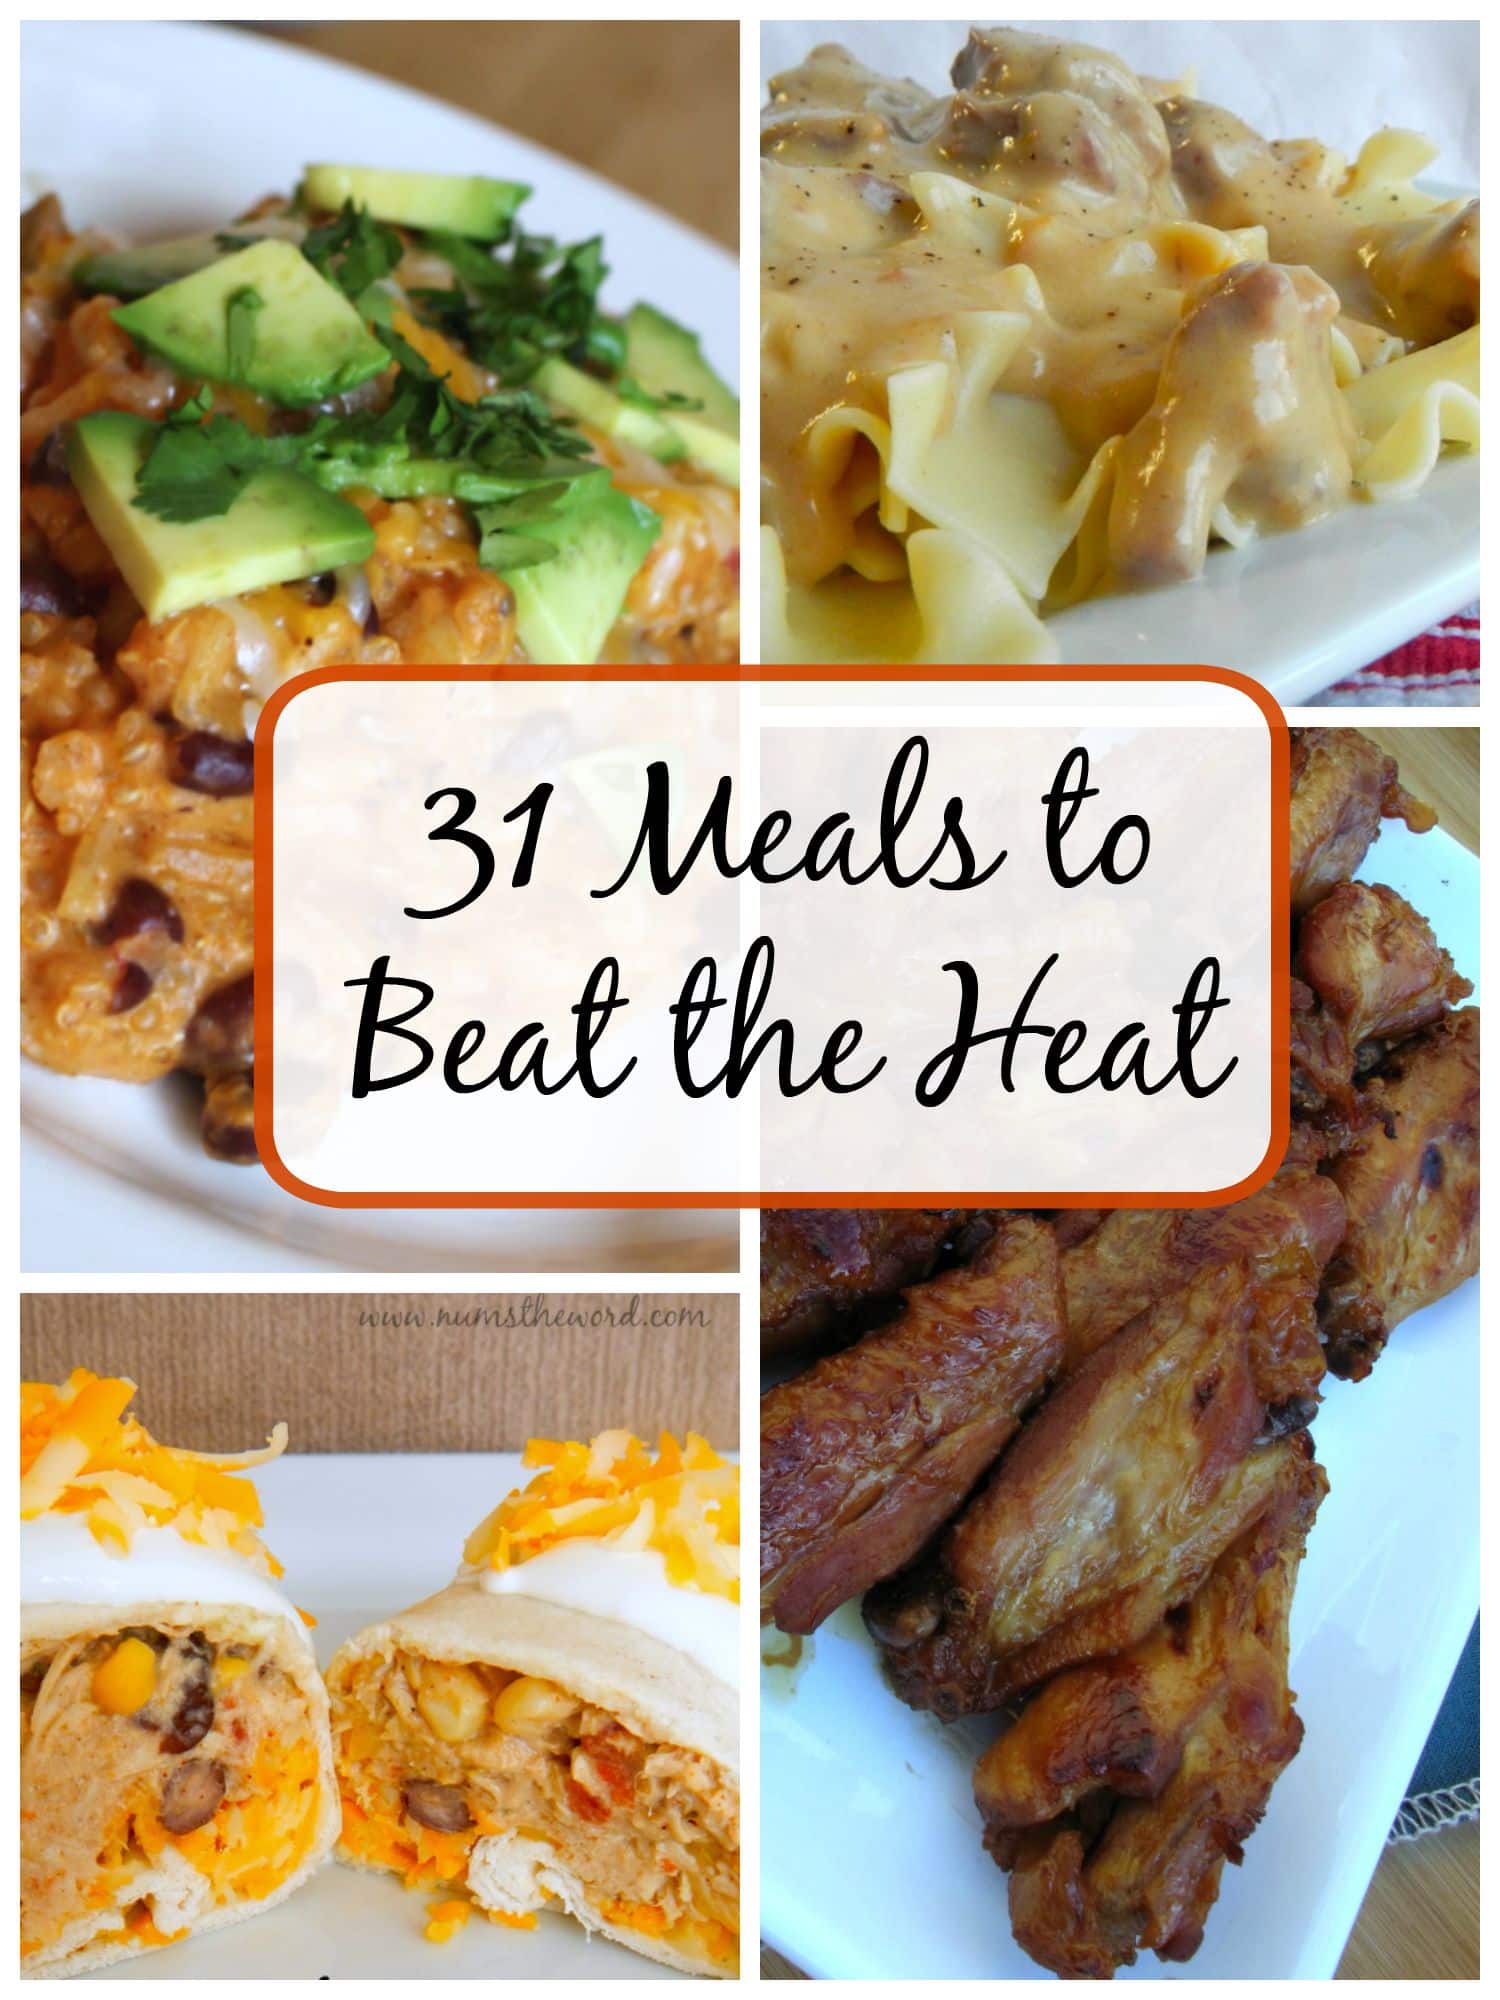 31 Meals to Beat the Heat